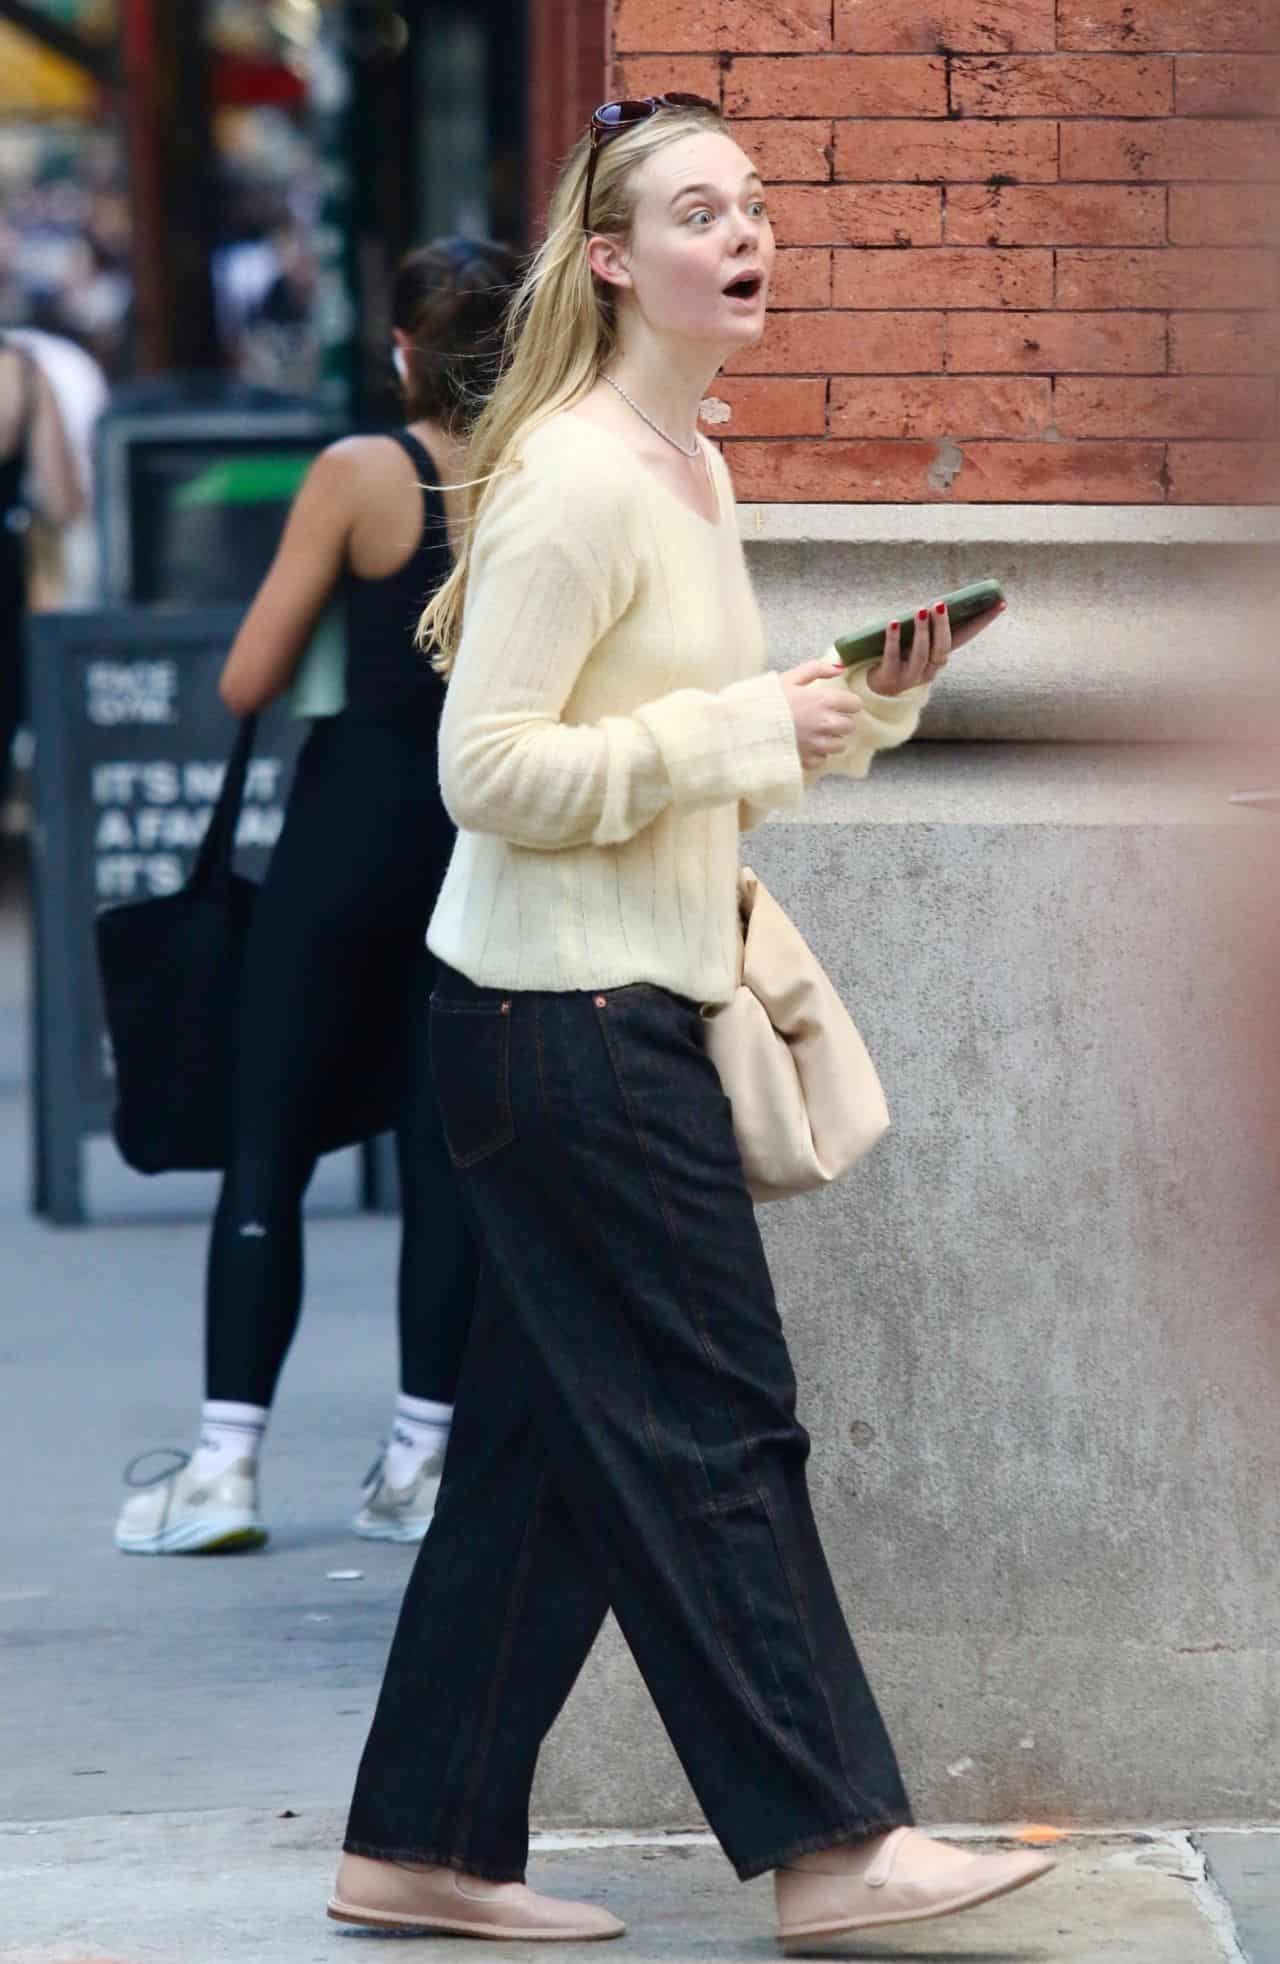 Elle Fanning Rocks Buttery Yellow Top and Black Pants in New York City